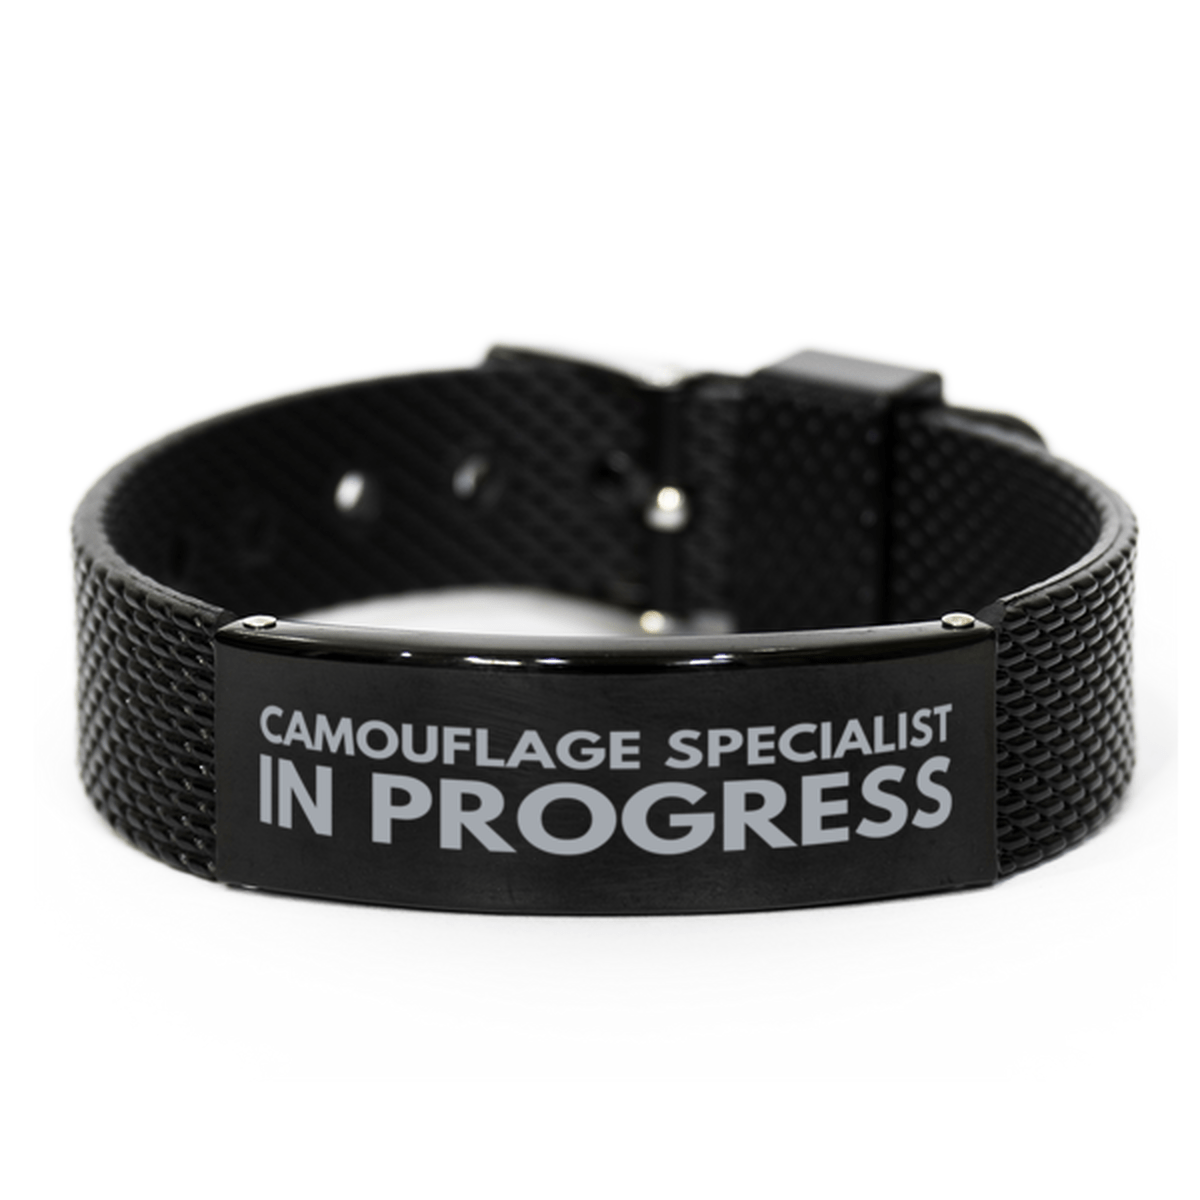 Inspirational Camouflage Specialist Black Shark Mesh Bracelet, Camouflage Specialist In Progress, Best Graduation Gifts for Students